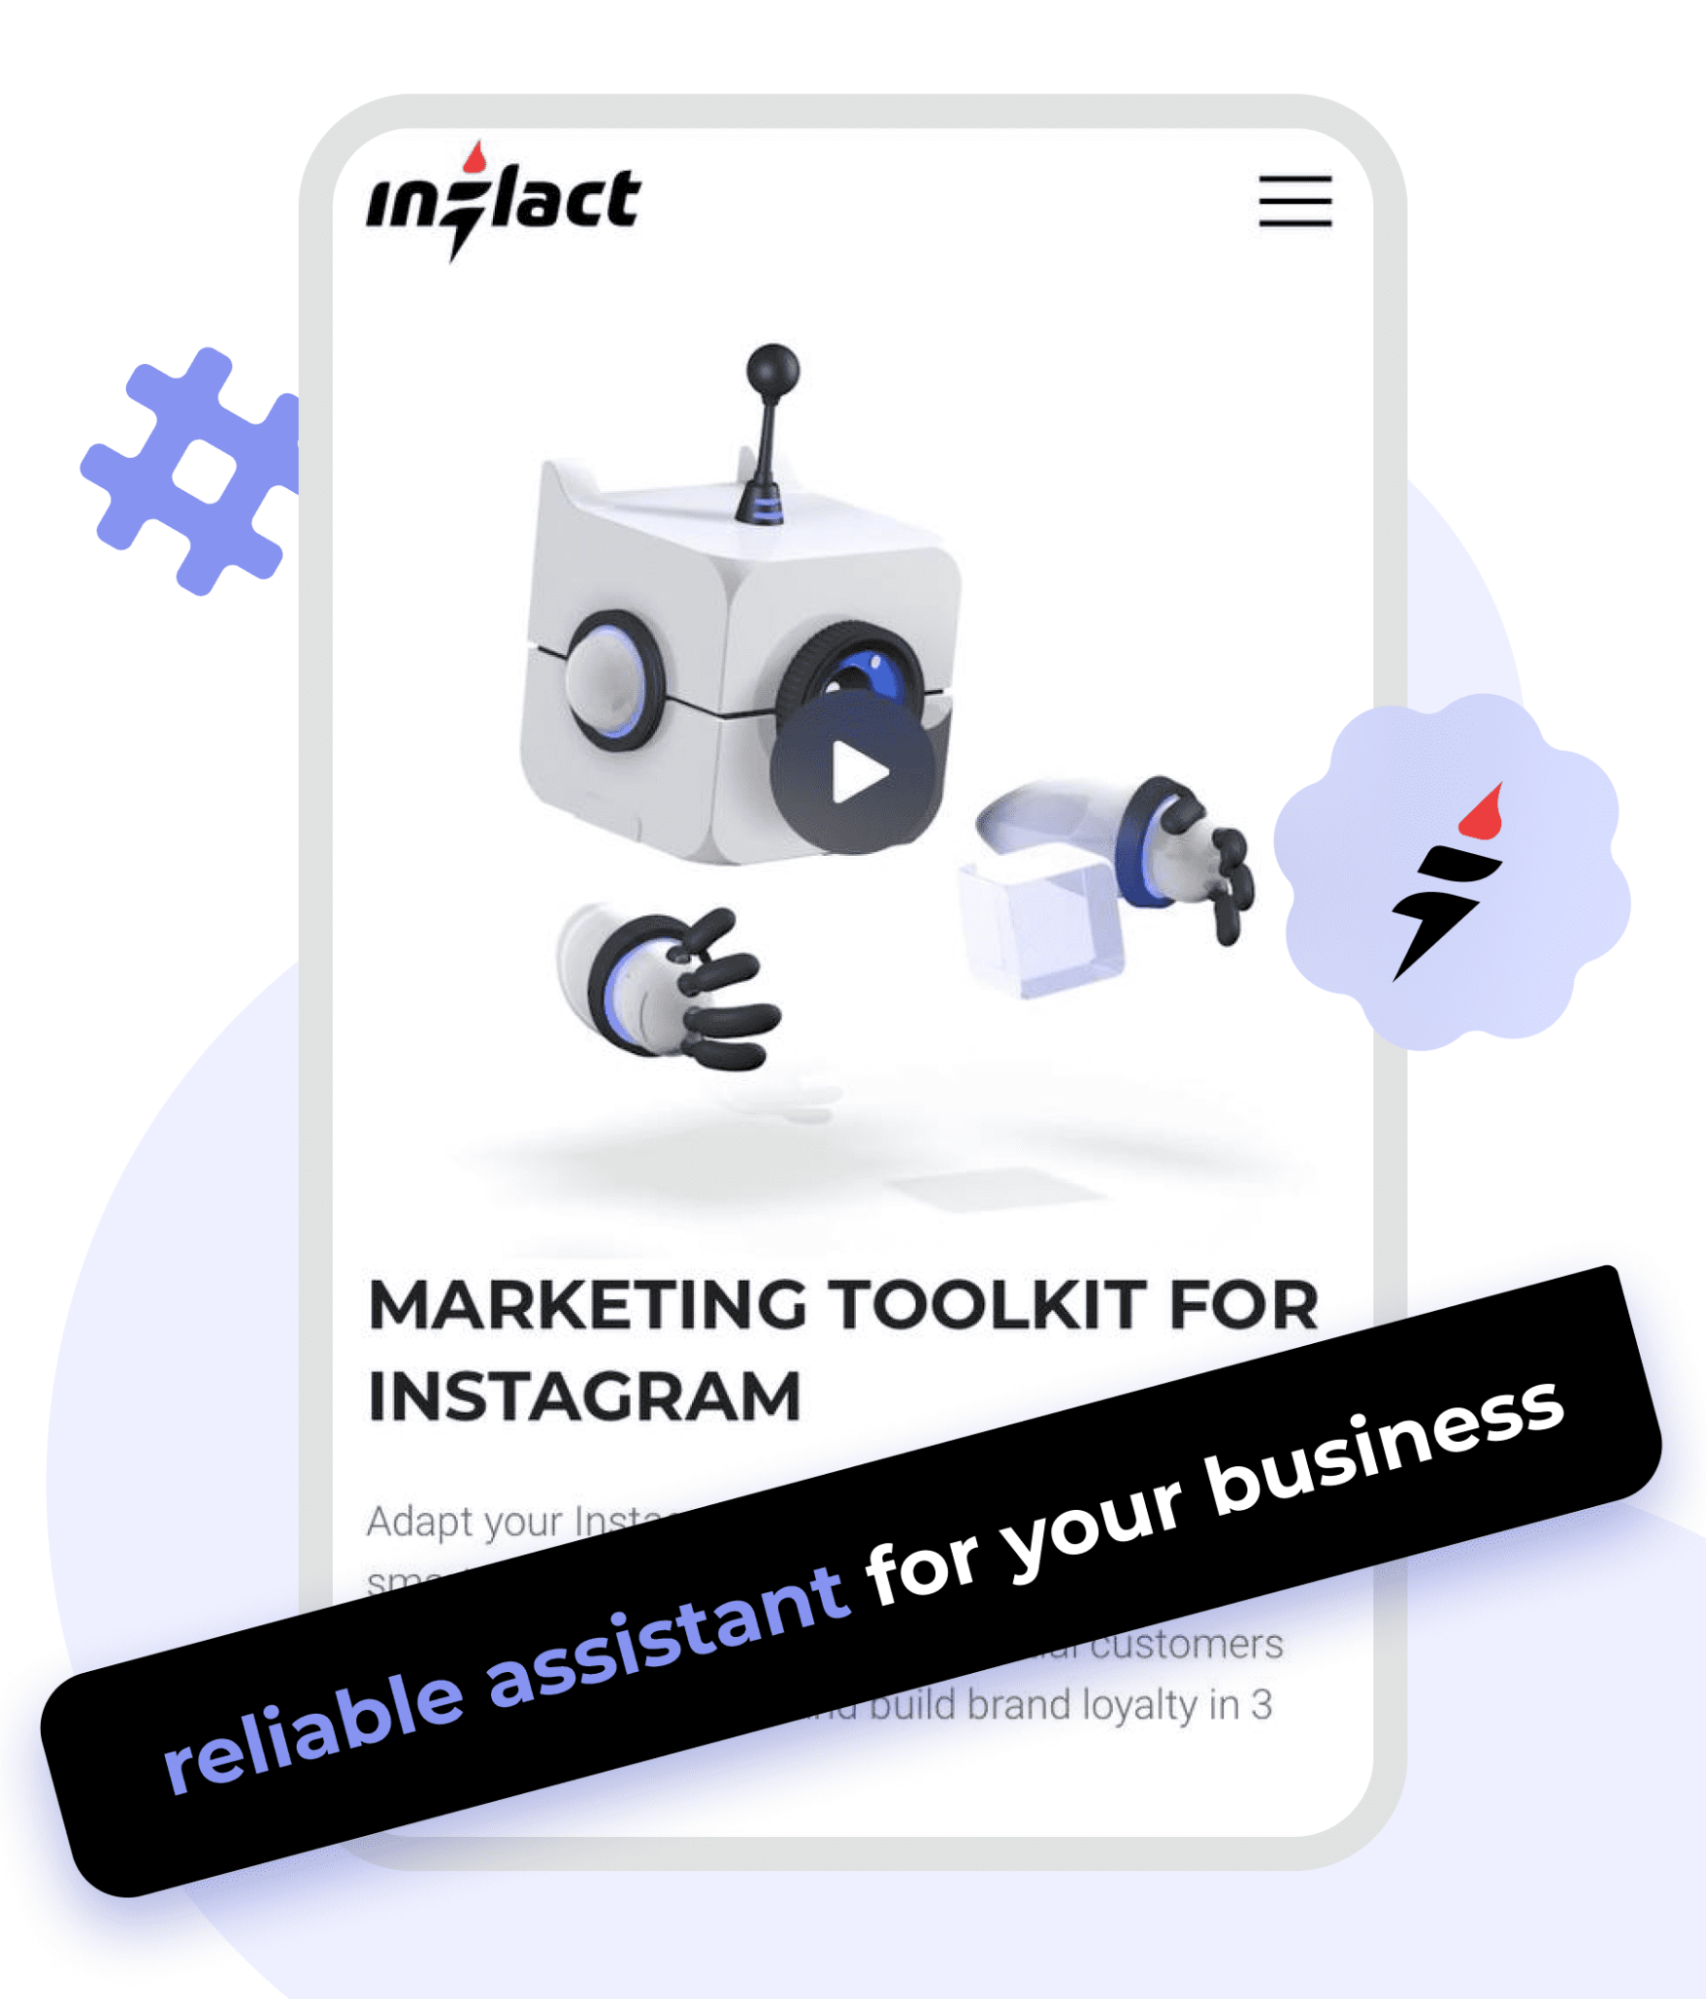 Inflact marketing tools for small business